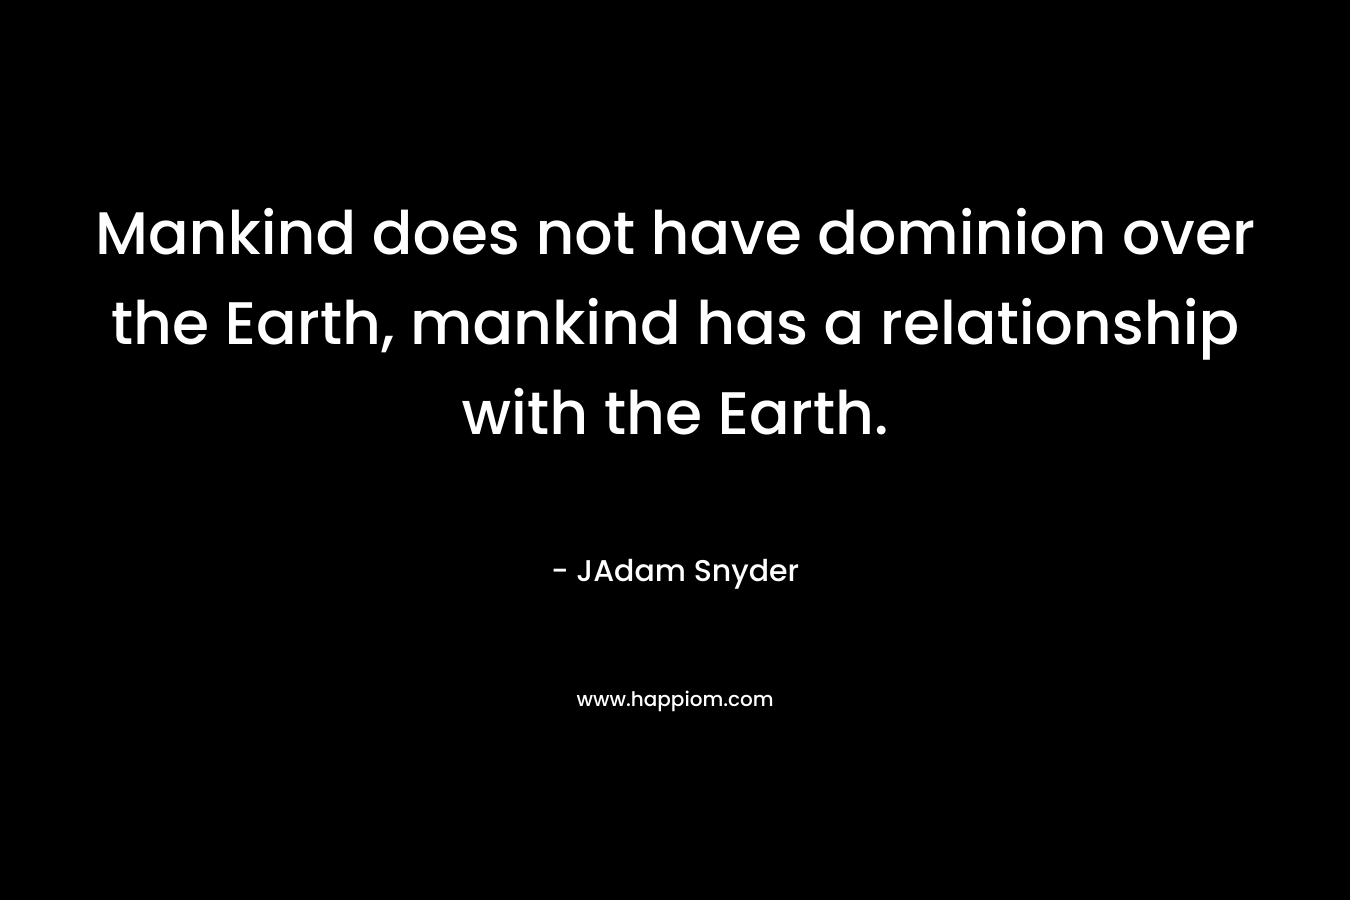 Mankind does not have dominion over the Earth, mankind has a relationship with the Earth. – JAdam Snyder